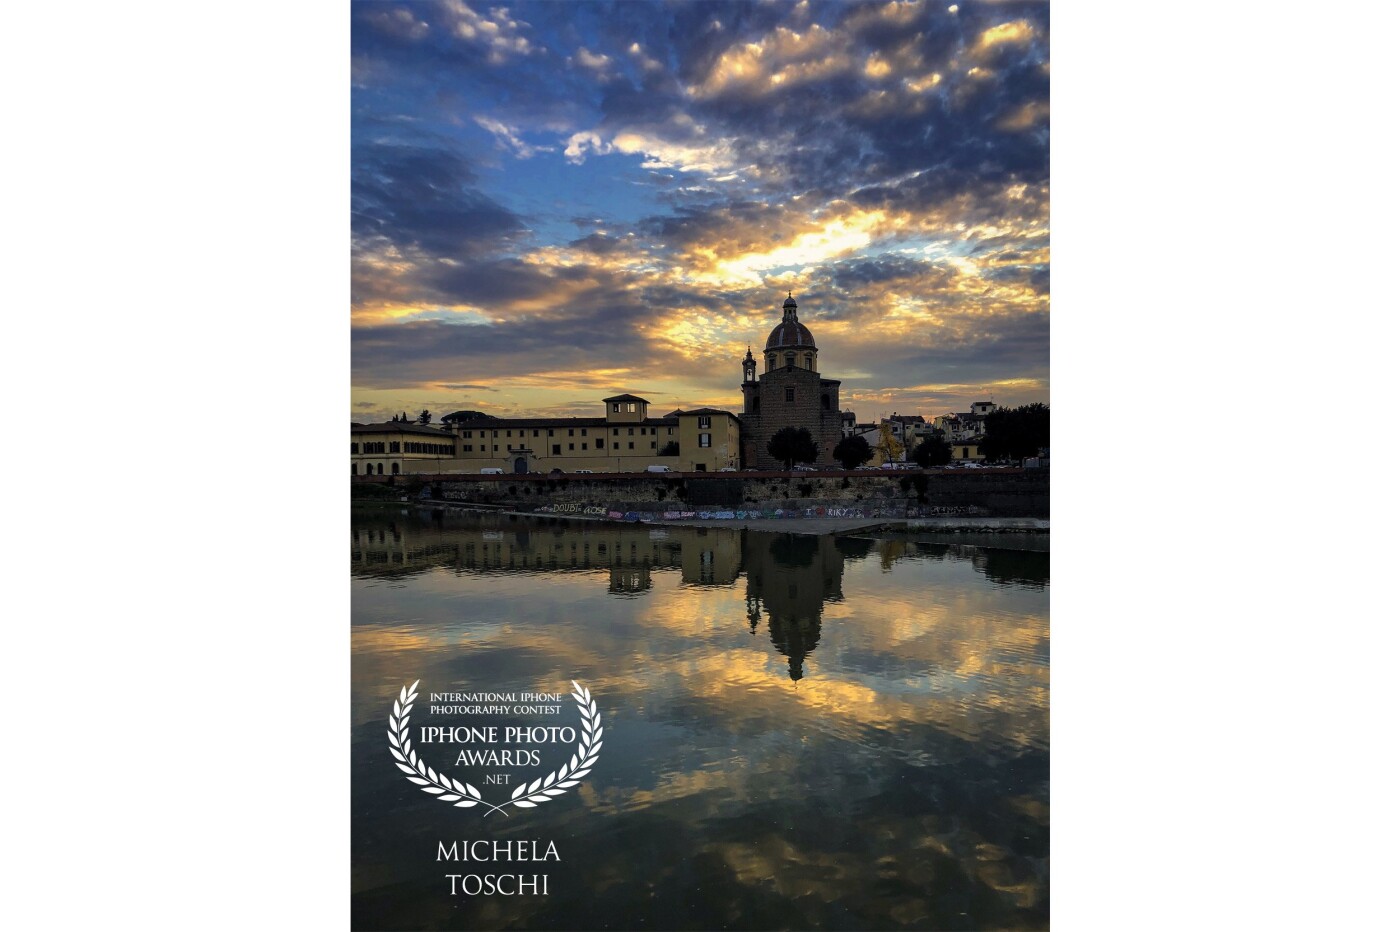 The church of San Frediano in Cestello in the Oltrarno district in Florence. Above it the sky that is preparing for the sunset. Below, its reflections in the Arno. <br />
An impromptu shot during a walk along the opposite bank of the river.